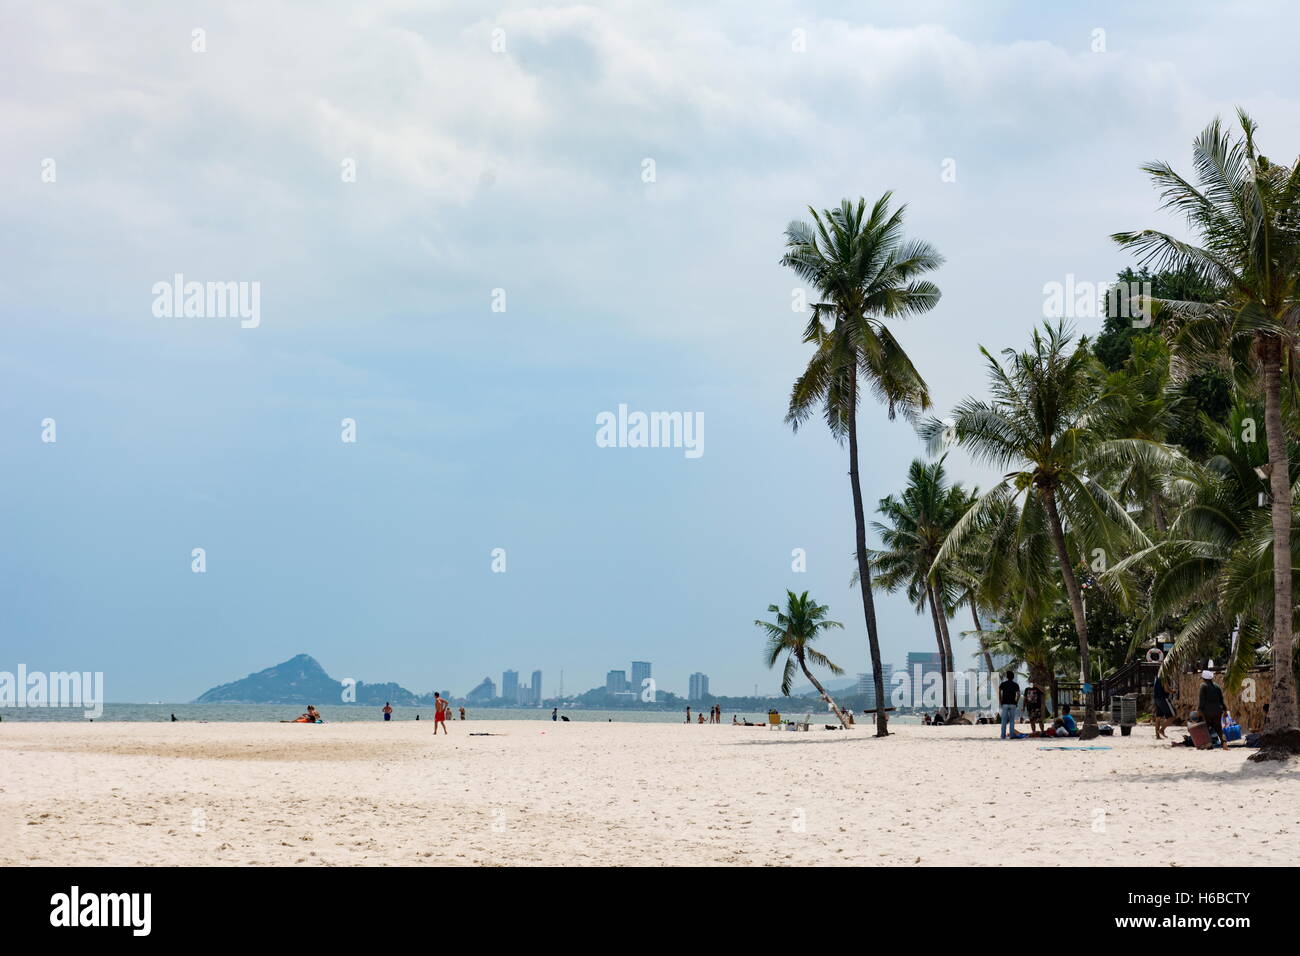 Hua Hin, Thailand - October 23, 2016: View at city beach at daytime with few tourists sunbathing and coconut trees Stock Photo